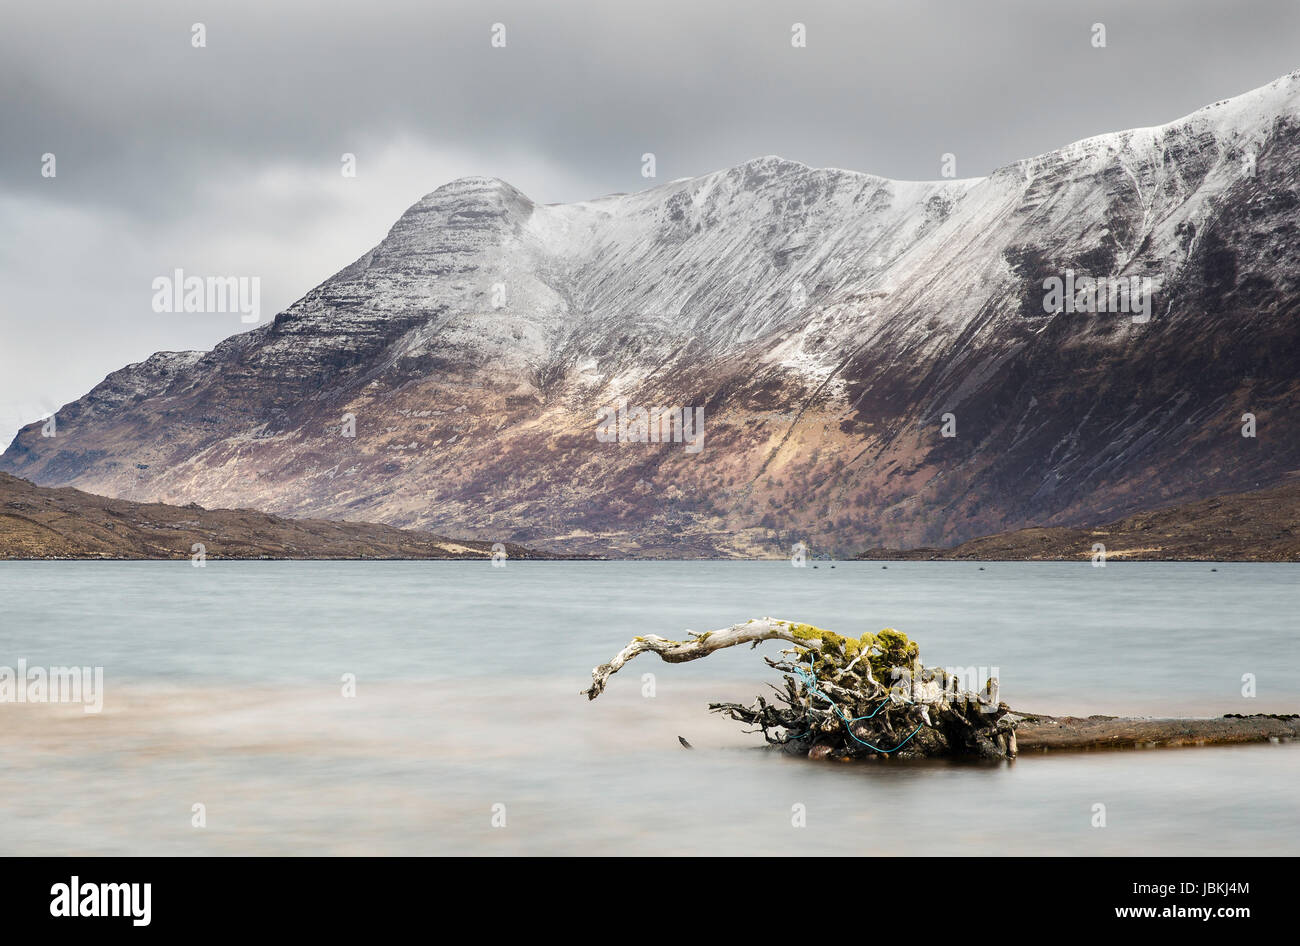 Loch Damh in Torridon, Scotland, with snowy mountains in the distance and an old tree truck floating in the lake in the foreground Stock Photo